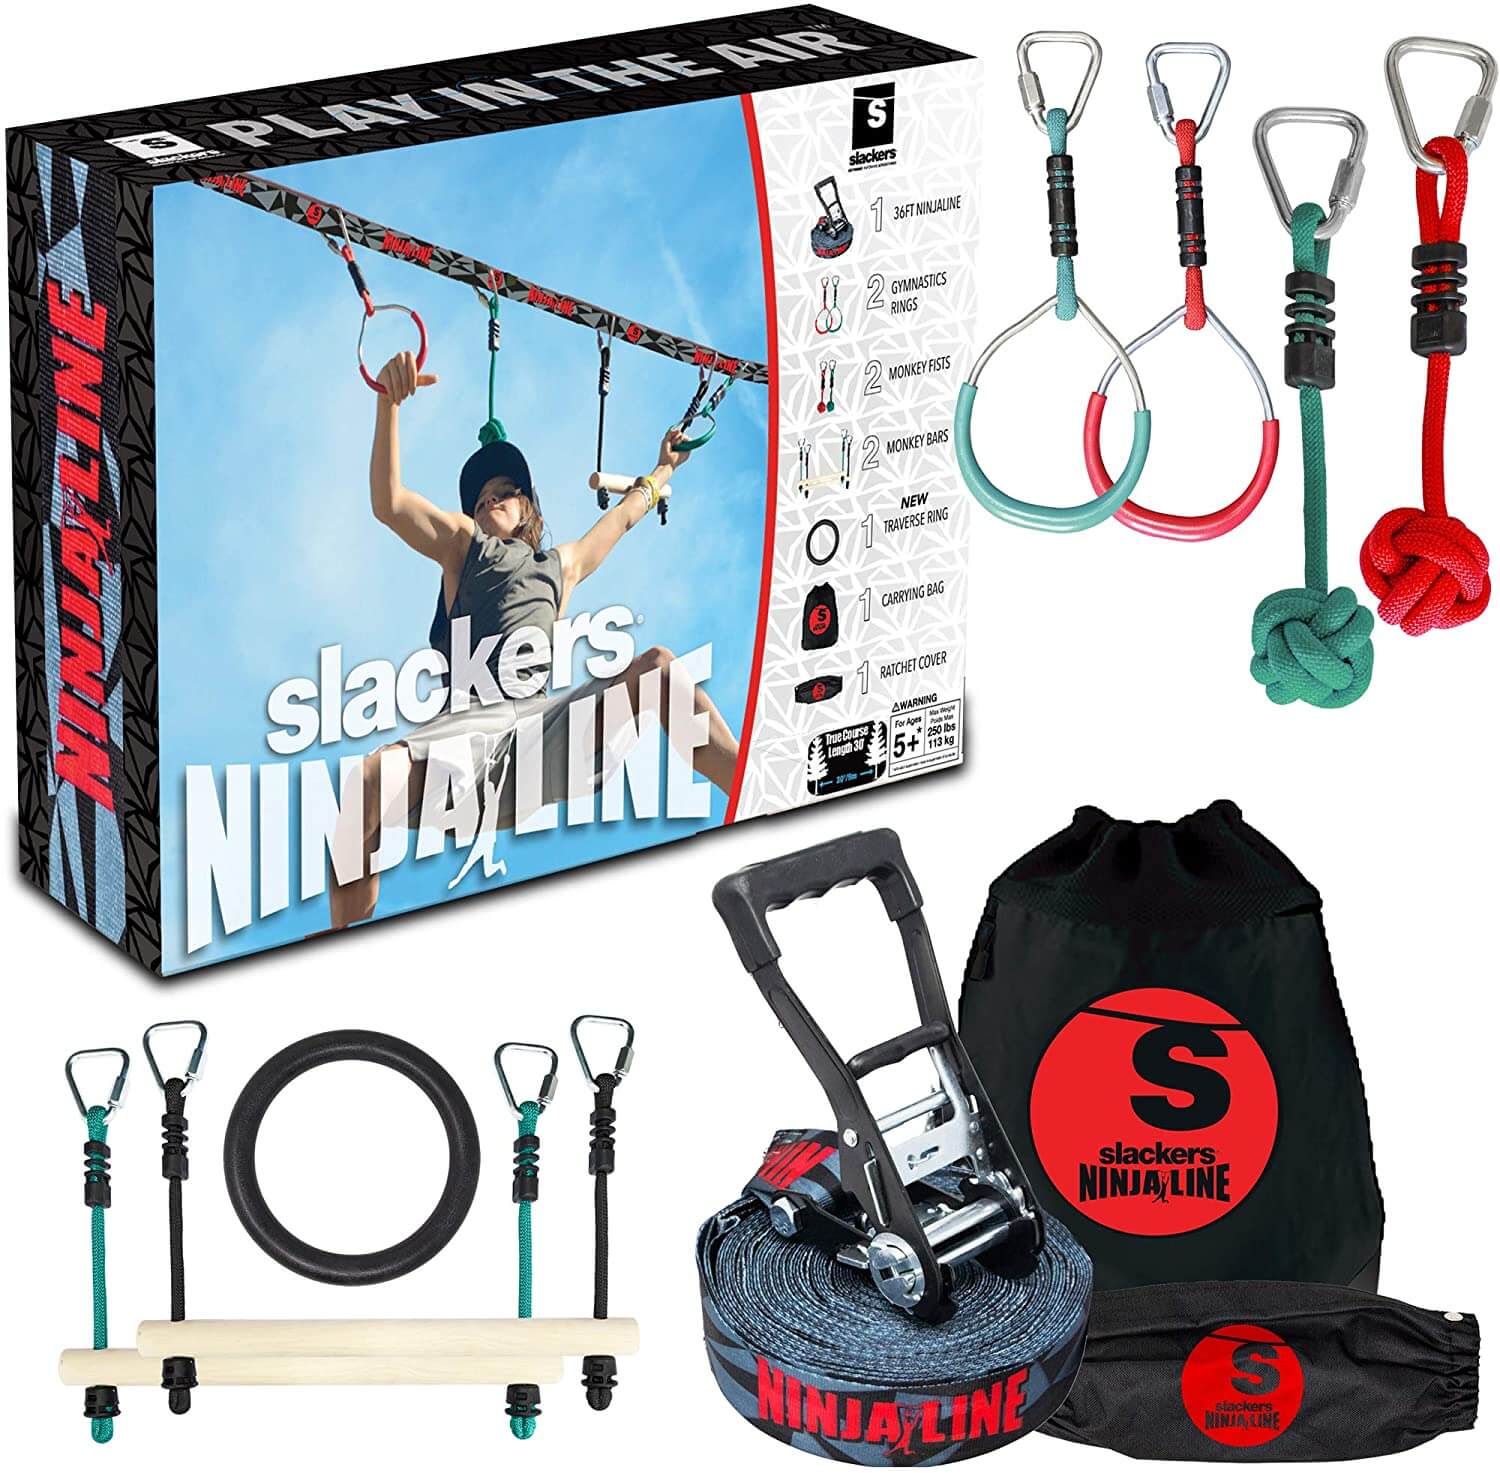 Slackers Ninjaline 36' Intro Kit with 7 Obstacles - A2Z Science